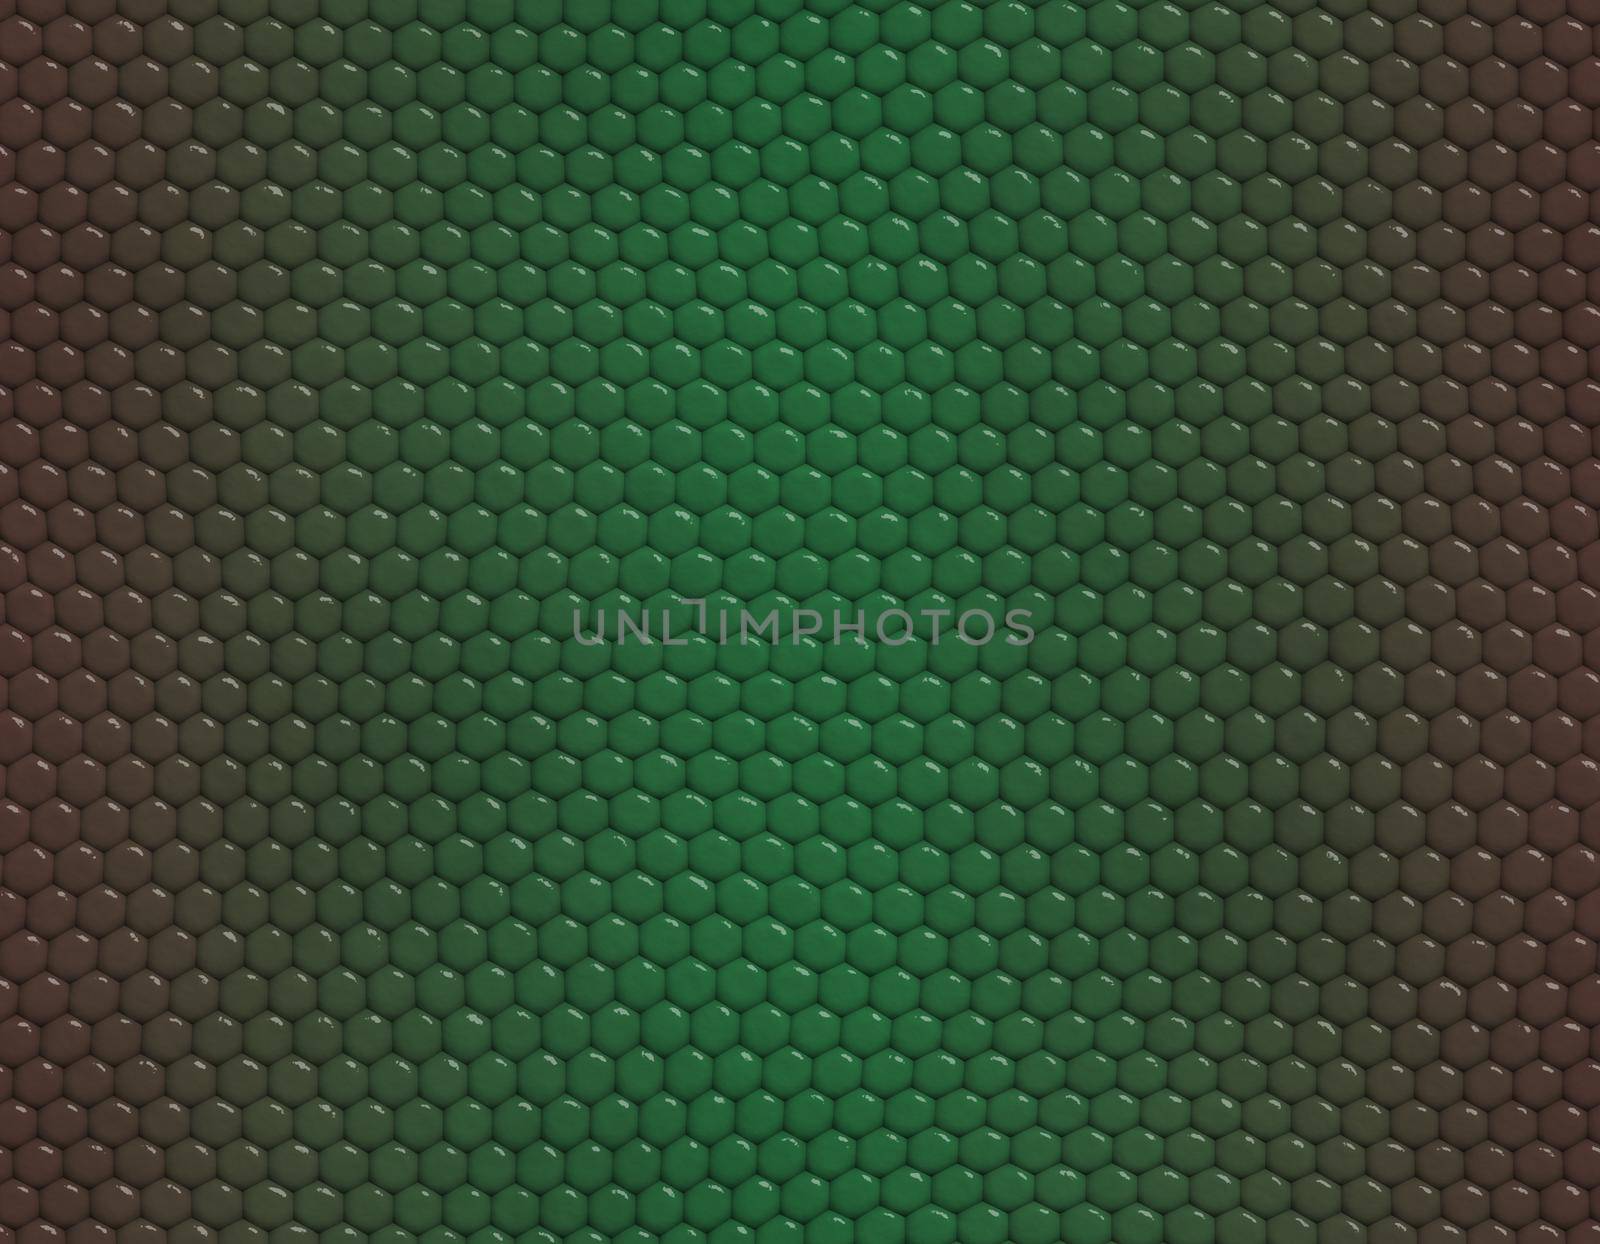 Brown and green gradient snake skin seamless pattern, hexagonal scale